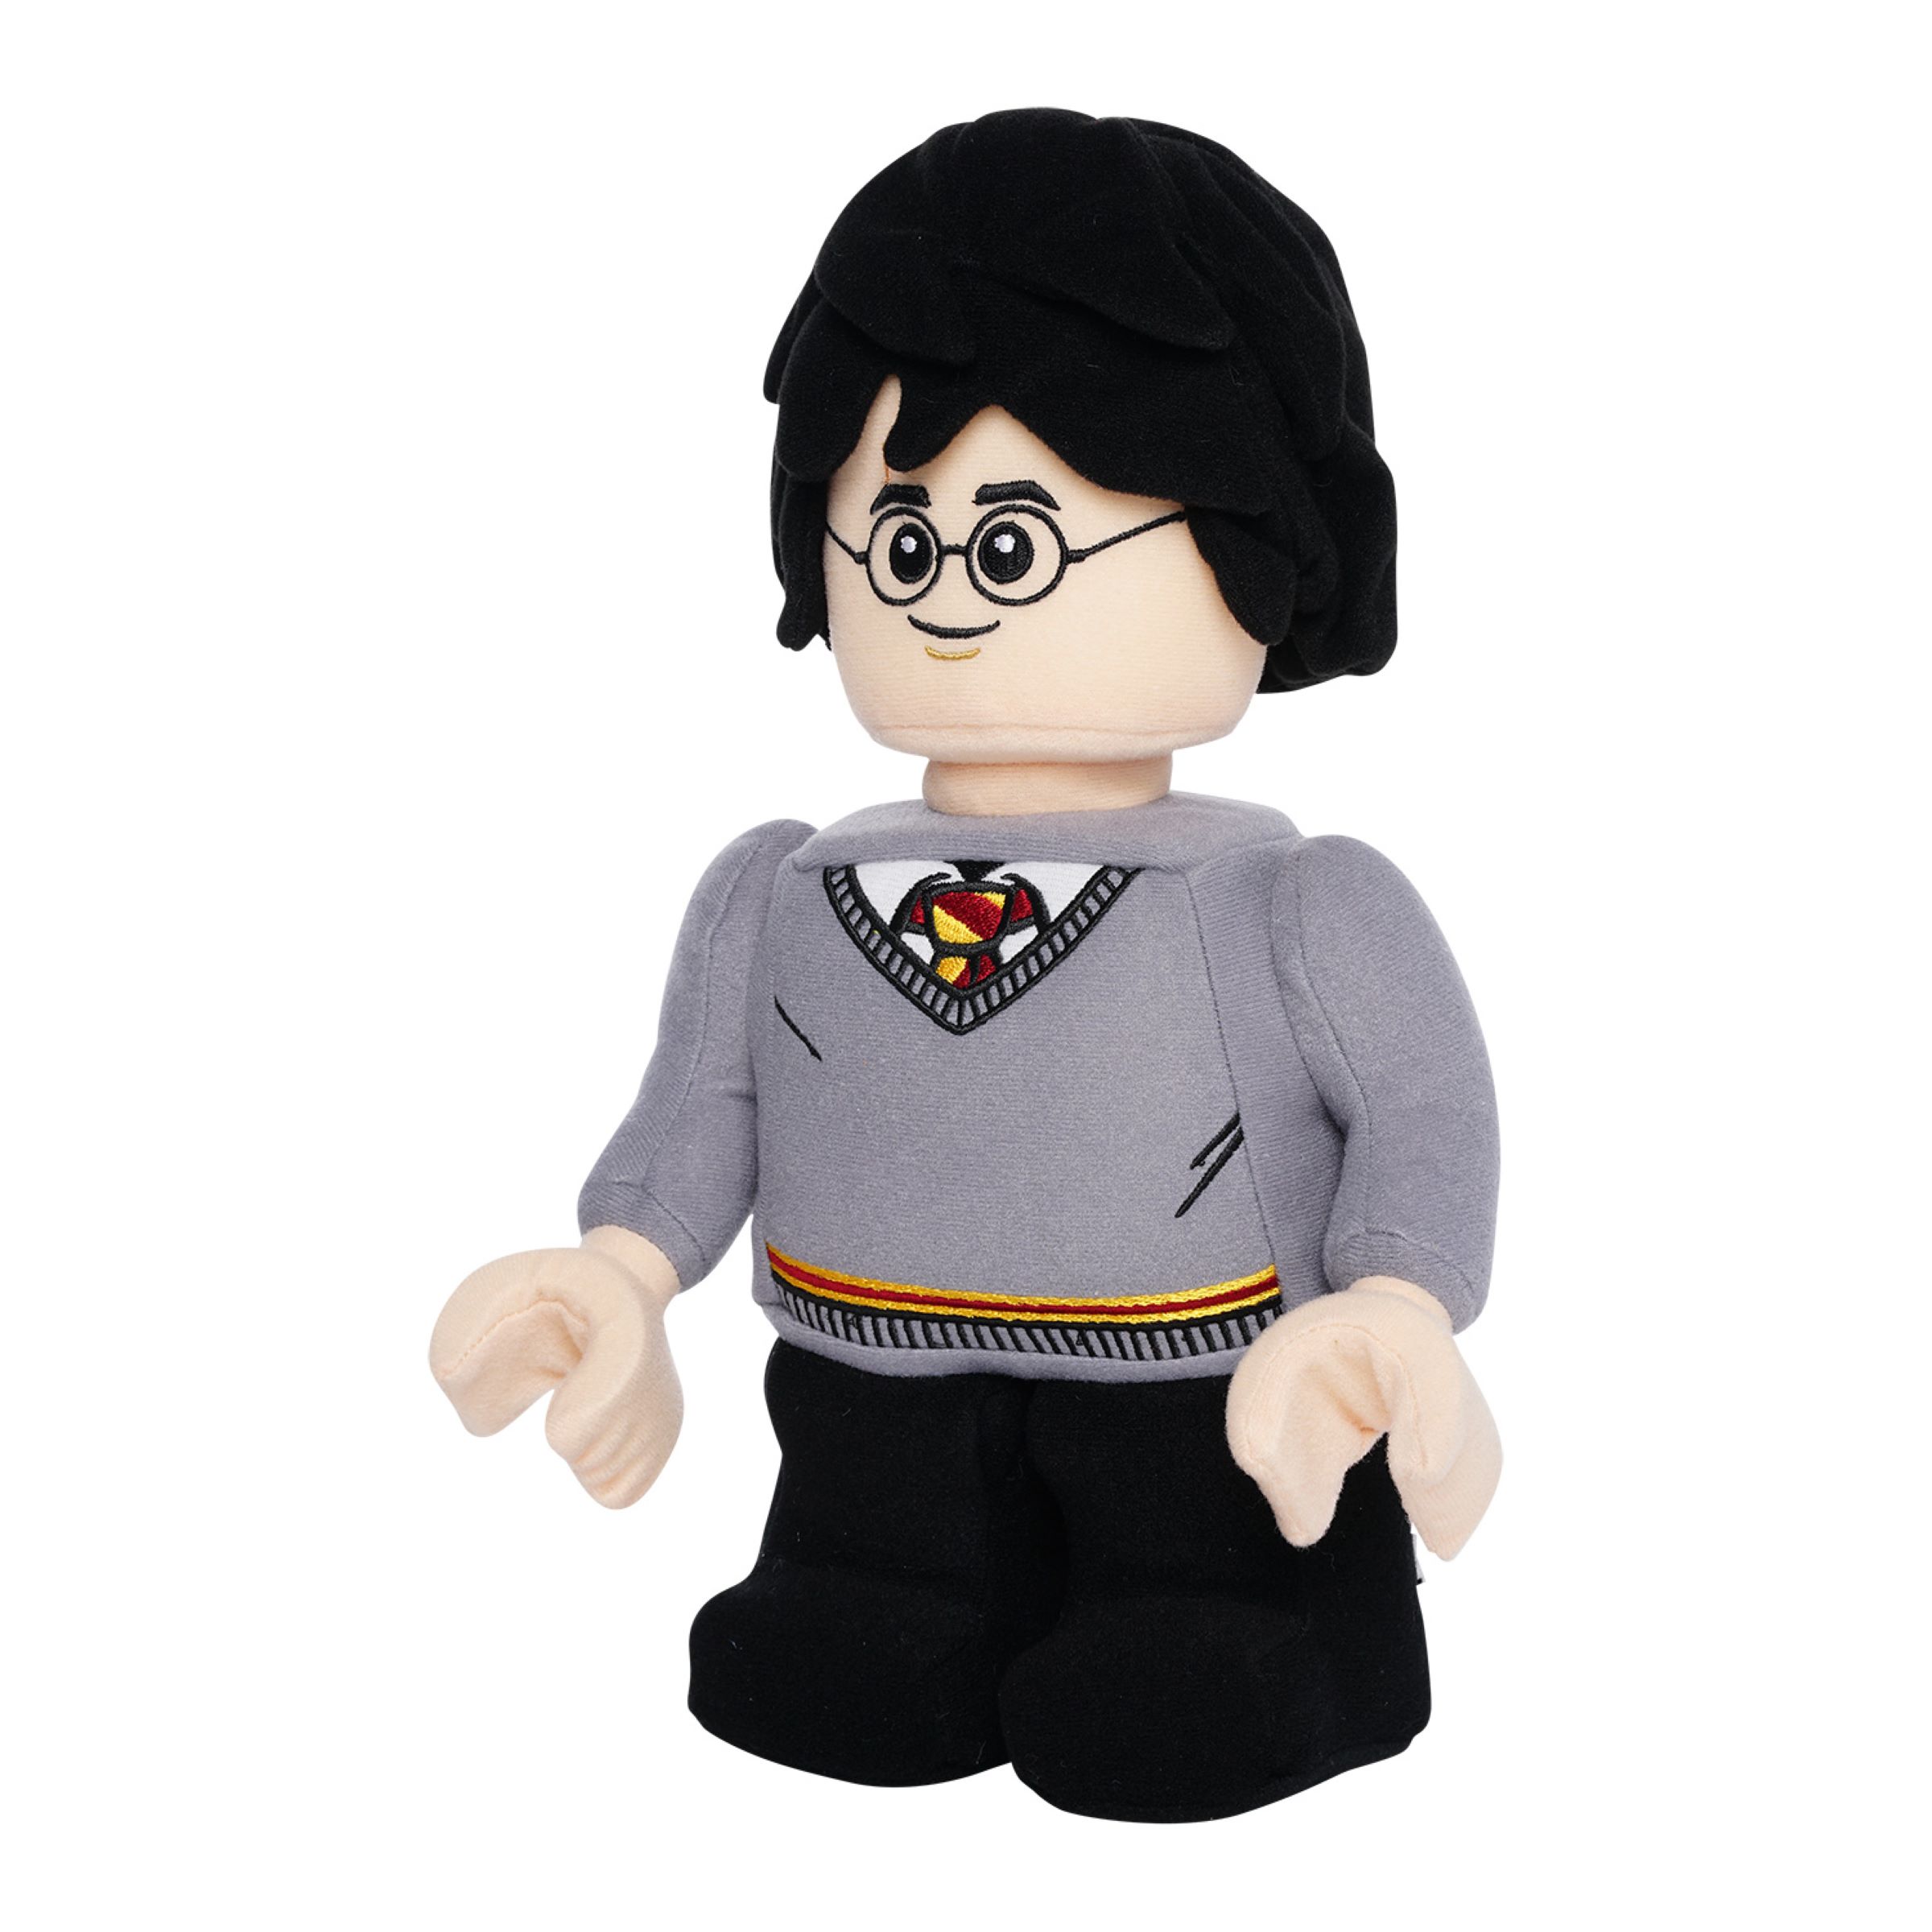 LEGO Harry Potter Plush Toy Collection officially revealed